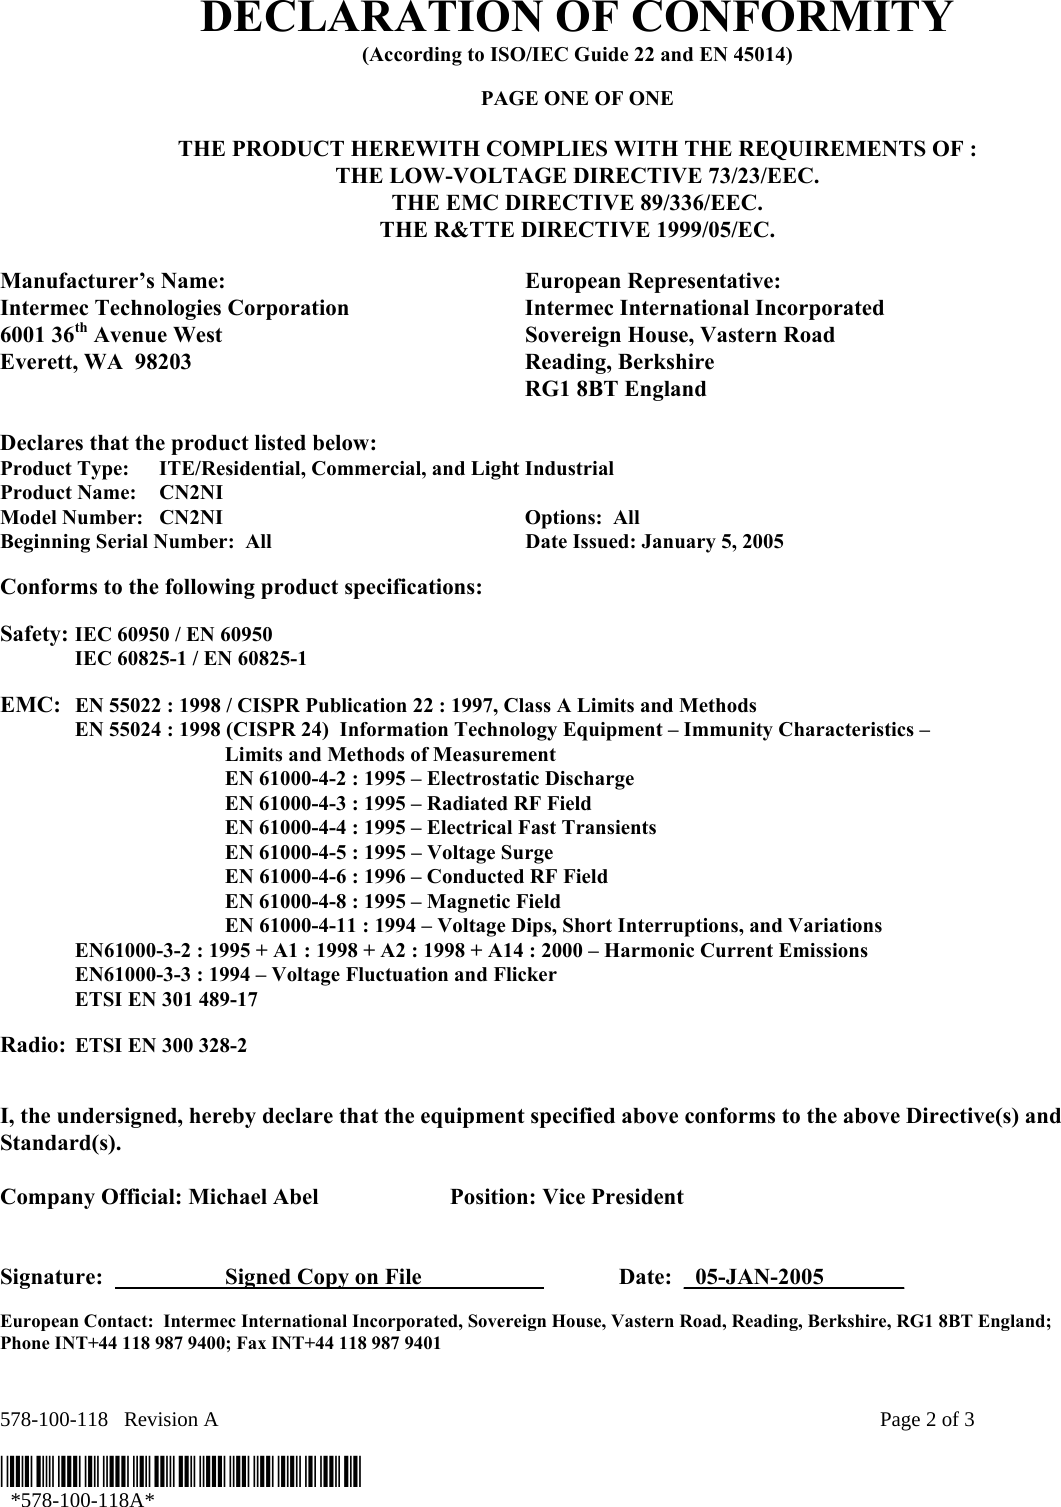 578-100-118   Revision A    Page 2 of 3  *578-100-118A*   *578-100-118A* DECLARATION OF CONFORMITY (According to ISO/IEC Guide 22 and EN 45014)  PAGE ONE OF ONE  THE PRODUCT HEREWITH COMPLIES WITH THE REQUIREMENTS OF : THE LOW-VOLTAGE DIRECTIVE 73/23/EEC. THE EMC DIRECTIVE 89/336/EEC. THE R&amp;TTE DIRECTIVE 1999/05/EC.  Manufacturer’s Name:  European Representative: Intermec Technologies Corporation  Intermec International Incorporated 6001 36th Avenue West  Sovereign House, Vastern Road Everett, WA  98203  Reading, Berkshire   RG1 8BT England  Declares that the product listed below: Product Type:  ITE/Residential, Commercial, and Light Industrial Product Name:    CN2NI Model Number:  CN2NI    Options:  All   Beginning Serial Number:  All  Date Issued: January 5, 2005  Conforms to the following product specifications:   Safety: IEC 60950 / EN 60950   IEC 60825-1 / EN 60825-1    EMC:  EN 55022 : 1998 / CISPR Publication 22 : 1997, Class A Limits and Methods   EN 55024 : 1998 (CISPR 24)  Information Technology Equipment – Immunity Characteristics –        Limits and Methods of Measurement     EN 61000-4-2 : 1995 – Electrostatic Discharge     EN 61000-4-3 : 1995 – Radiated RF Field     EN 61000-4-4 : 1995 – Electrical Fast Transients     EN 61000-4-5 : 1995 – Voltage Surge     EN 61000-4-6 : 1996 – Conducted RF Field     EN 61000-4-8 : 1995 – Magnetic Field     EN 61000-4-11 : 1994 – Voltage Dips, Short Interruptions, and Variations   EN61000-3-2 : 1995 + A1 : 1998 + A2 : 1998 + A14 : 2000 – Harmonic Current Emissions   EN61000-3-3 : 1994 – Voltage Fluctuation and Flicker   ETSI EN 301 489-17   Radio: ETSI EN 300 328-2      I, the undersigned, hereby declare that the equipment specified above conforms to the above Directive(s) and Standard(s).  Company Official: Michael Abel  Position: Vice President   Signature:    Signed Copy on File      Date:  _05-JAN-2005_______  European Contact:  Intermec International Incorporated, Sovereign House, Vastern Road, Reading, Berkshire, RG1 8BT England;  Phone INT+44 118 987 9400; Fax INT+44 118 987 9401  